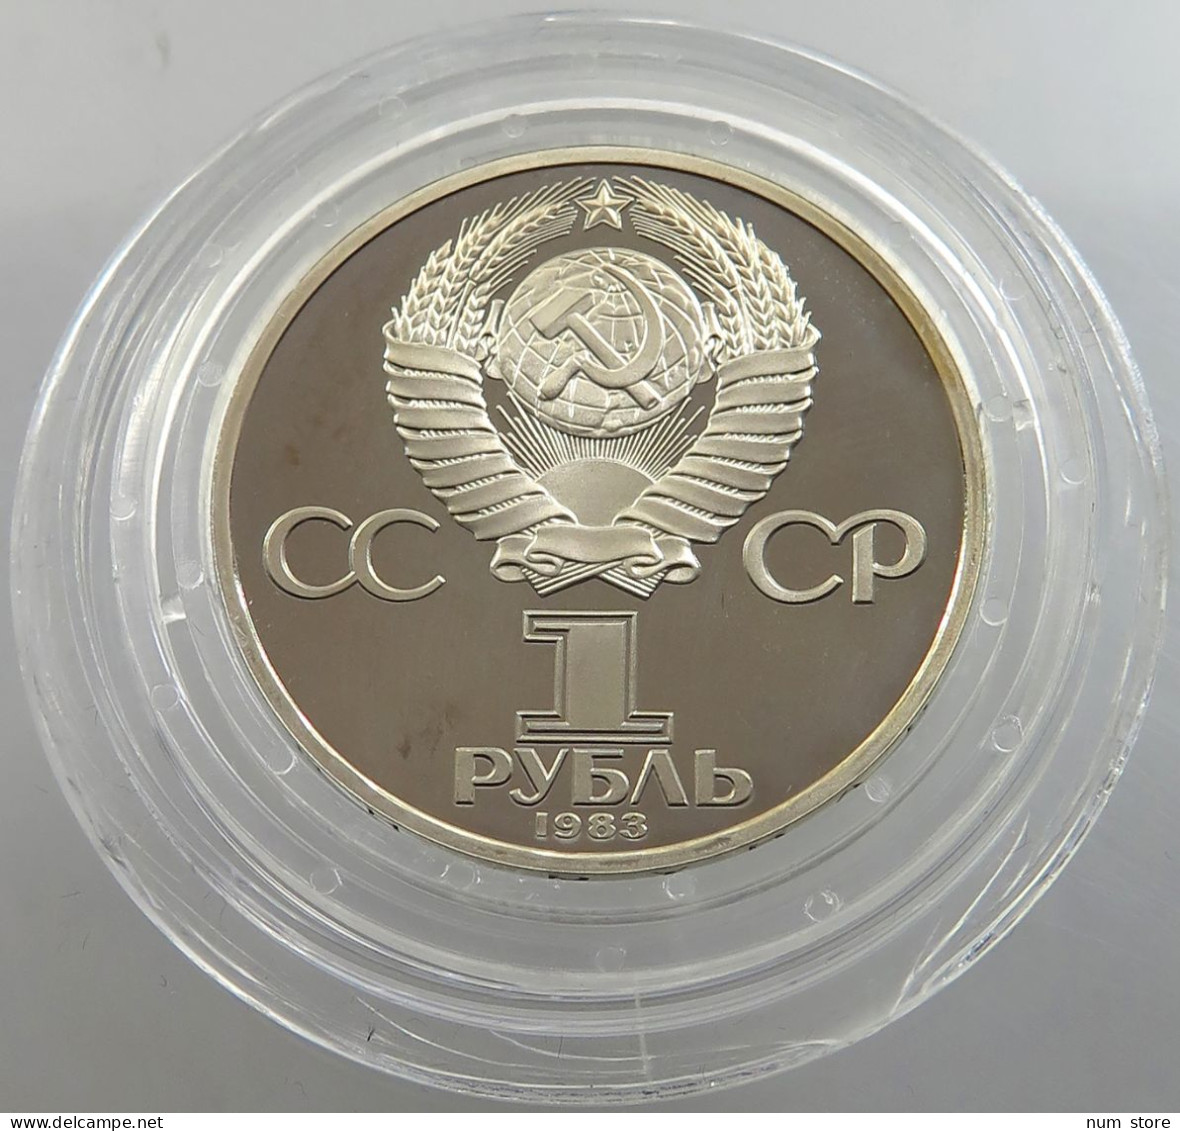 RUSSIA USSR 1 ROUBLE 1983 WITHOUT 1988 ON EDGE MARX PROOF #sm14 0335 - Russia